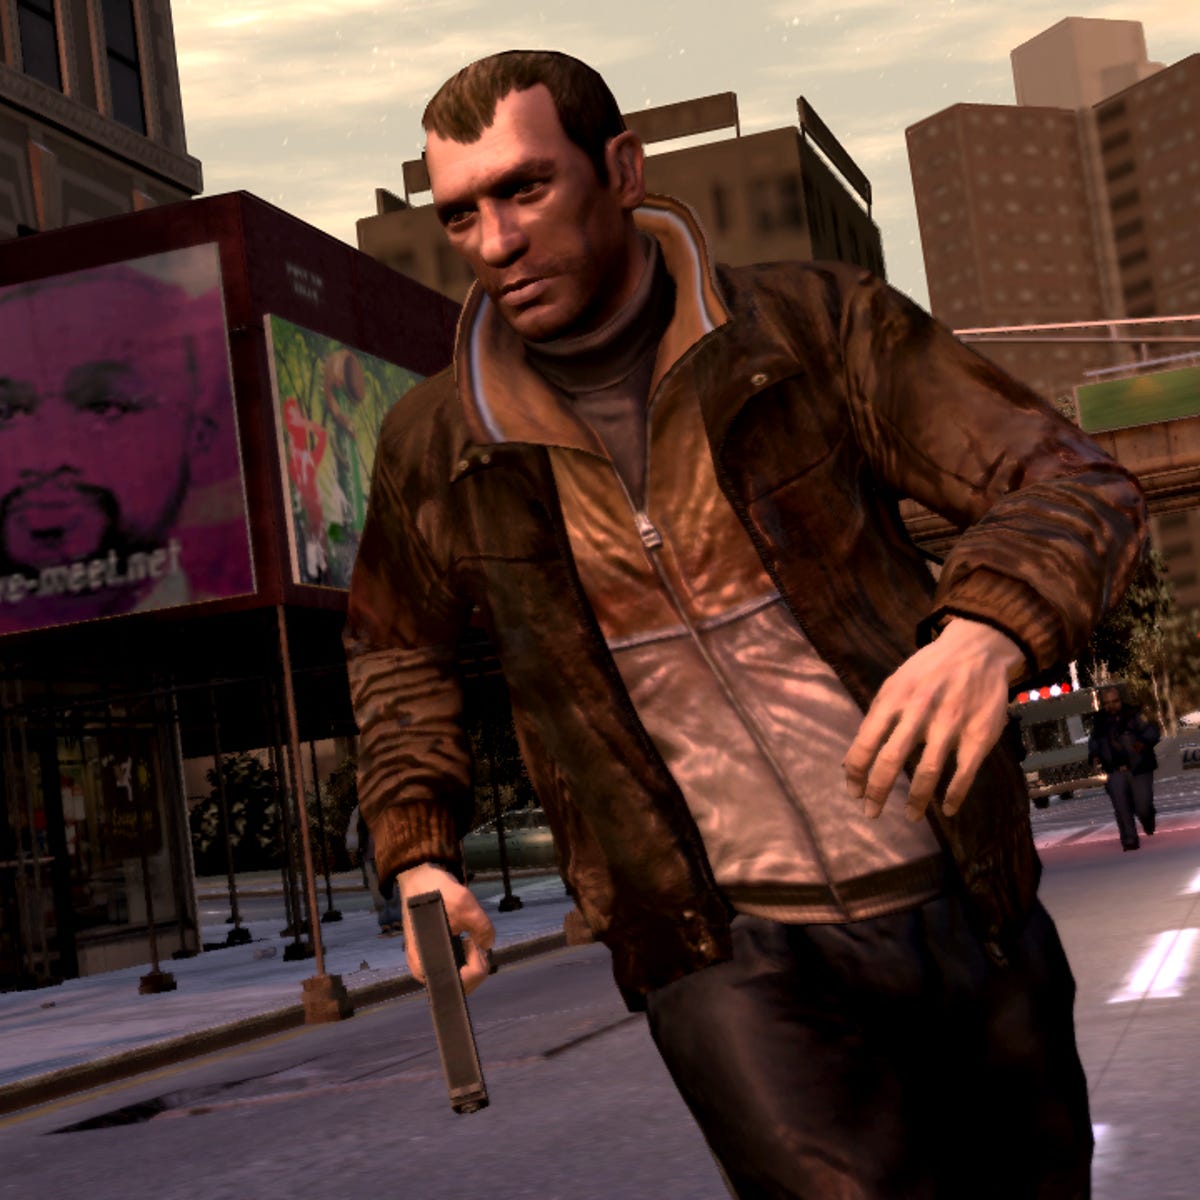 GTA IV': The good, the bad, and the sometimes ugly - CNET